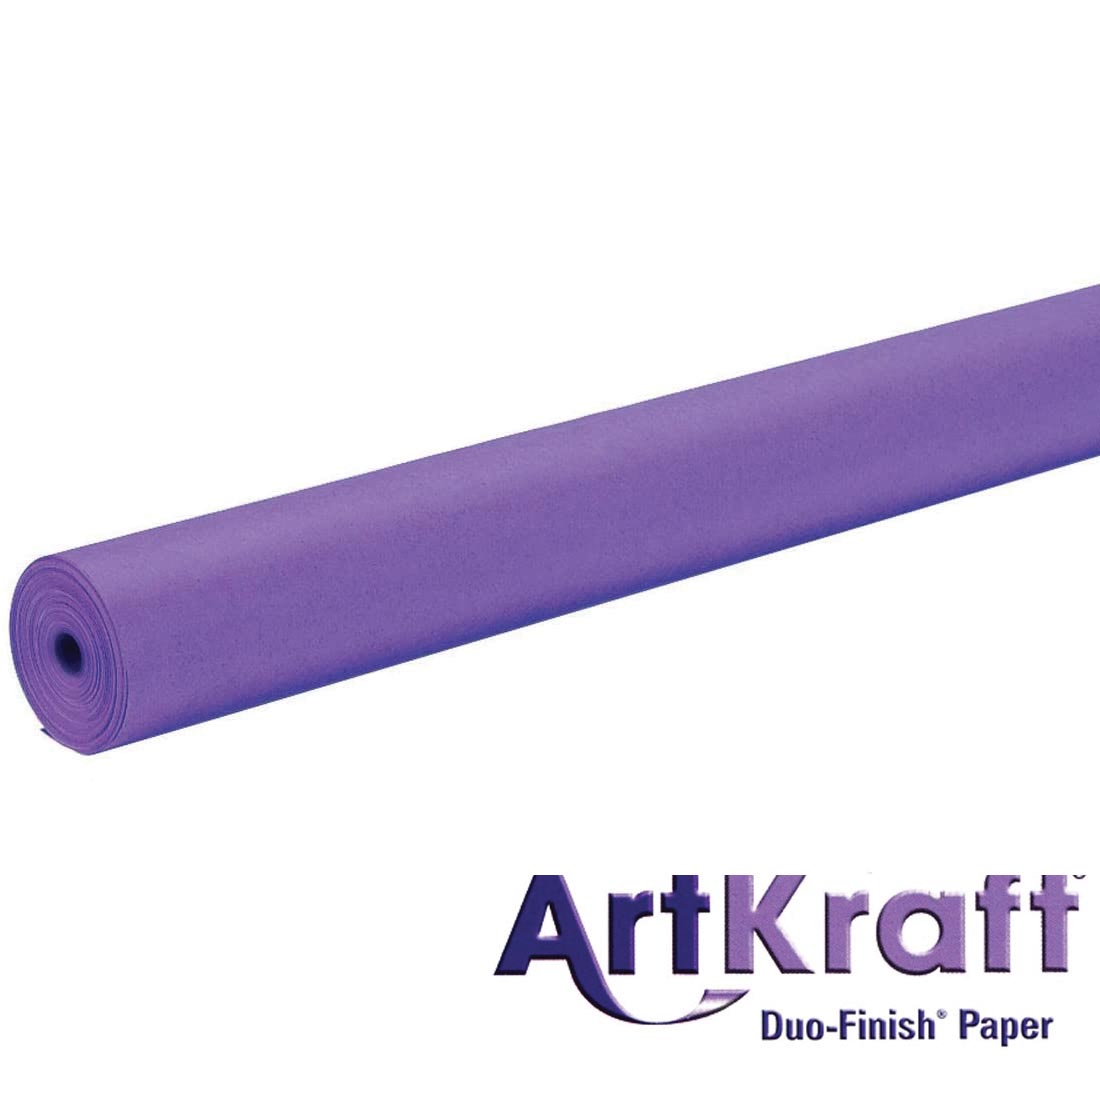 Roll of Purple Paper with text ArtKraft Duo-Finish Paper